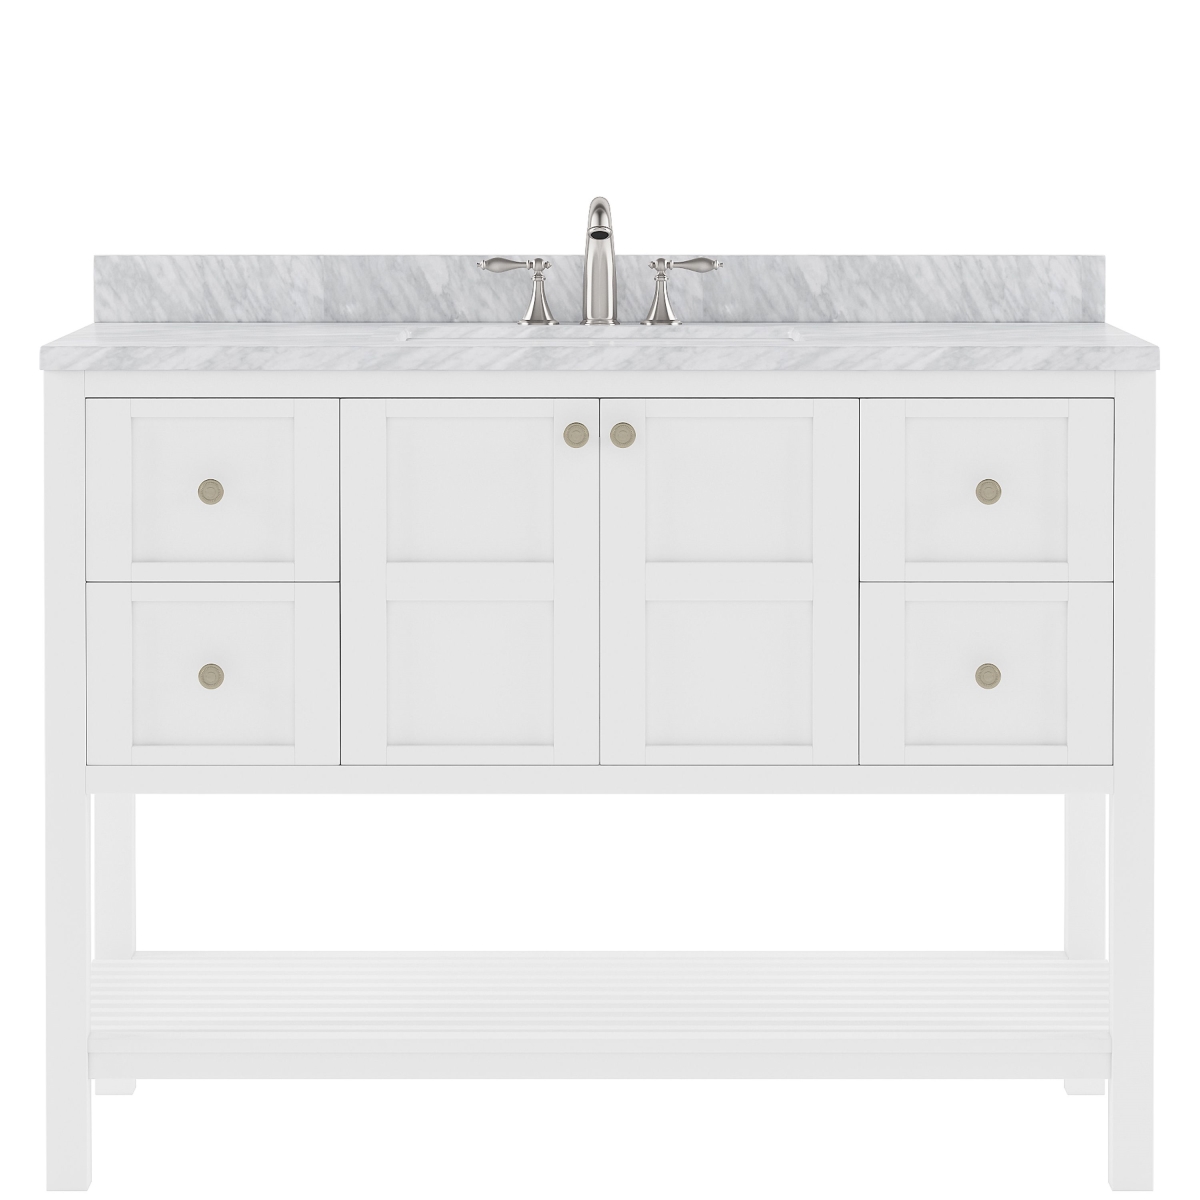 USA ES-30048-WMRO-WH-002-NM 48 in. Winterfell Single Bath Vanity with White Marble Top & Round Sink for Polished Chrome Faucet, White -  VIRTU